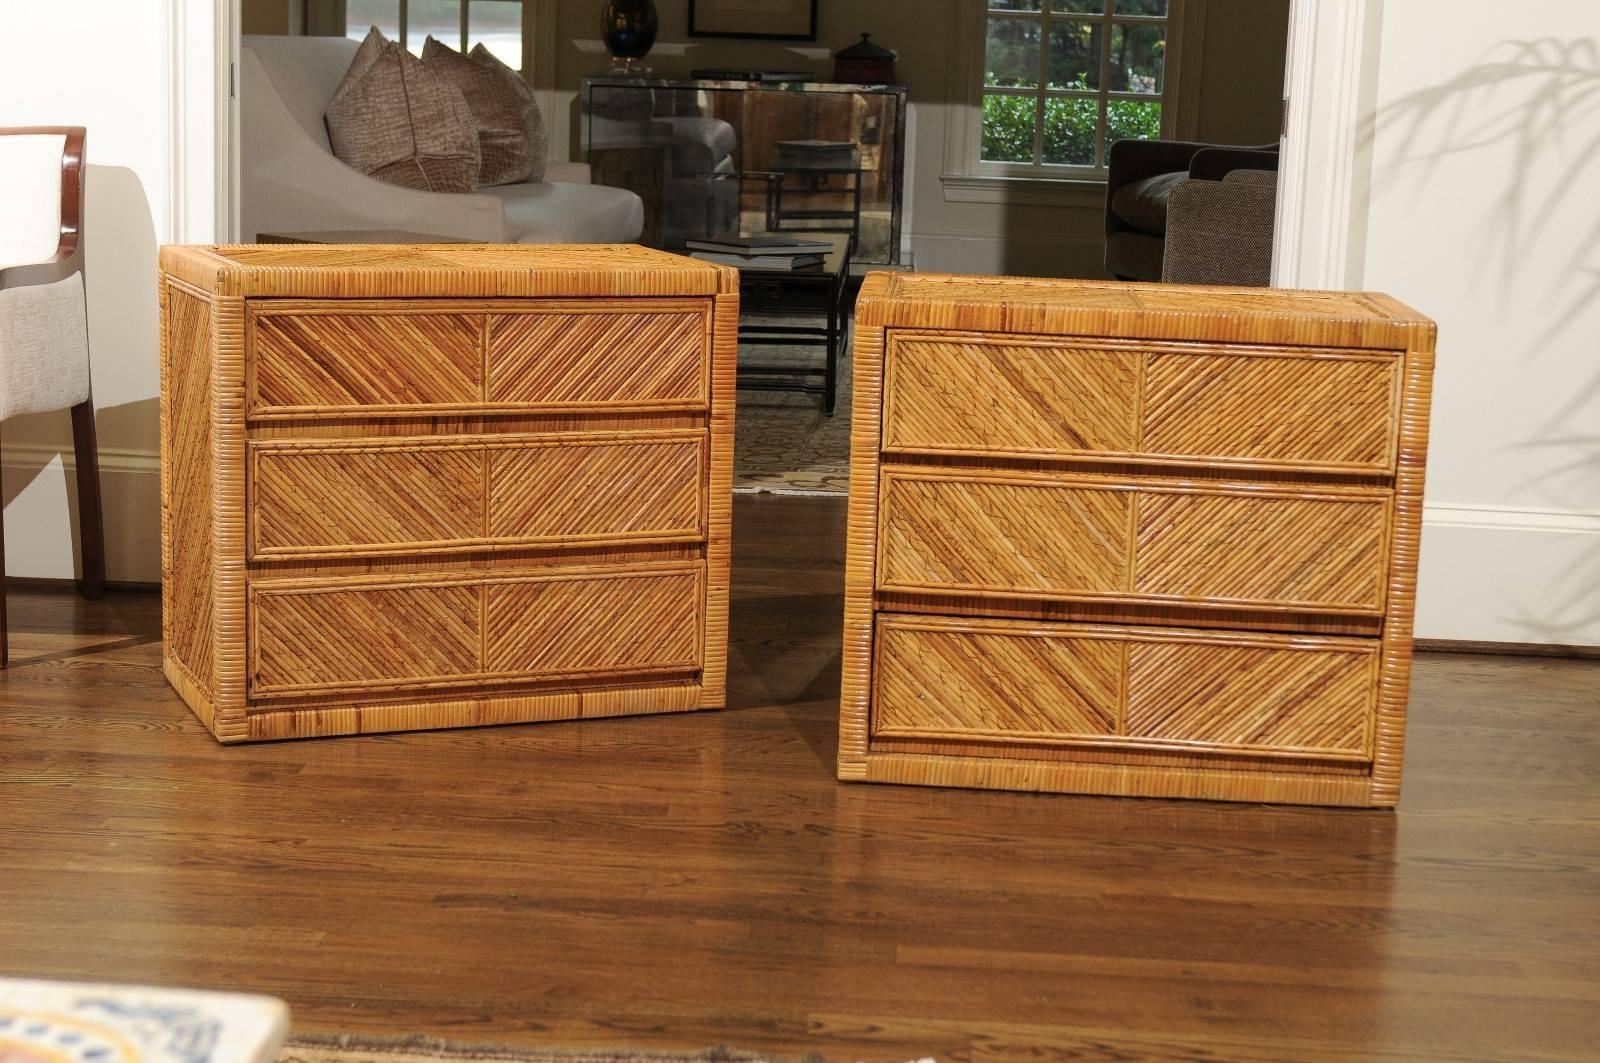 An exquisite pair of vintage small chests, circa 1975. Exceptionally crafted solid hardwood case construction, painstakingly veneered in diagonally applied reed bamboo with rattan cane accents. Completely finished on all sides. Stellar design and